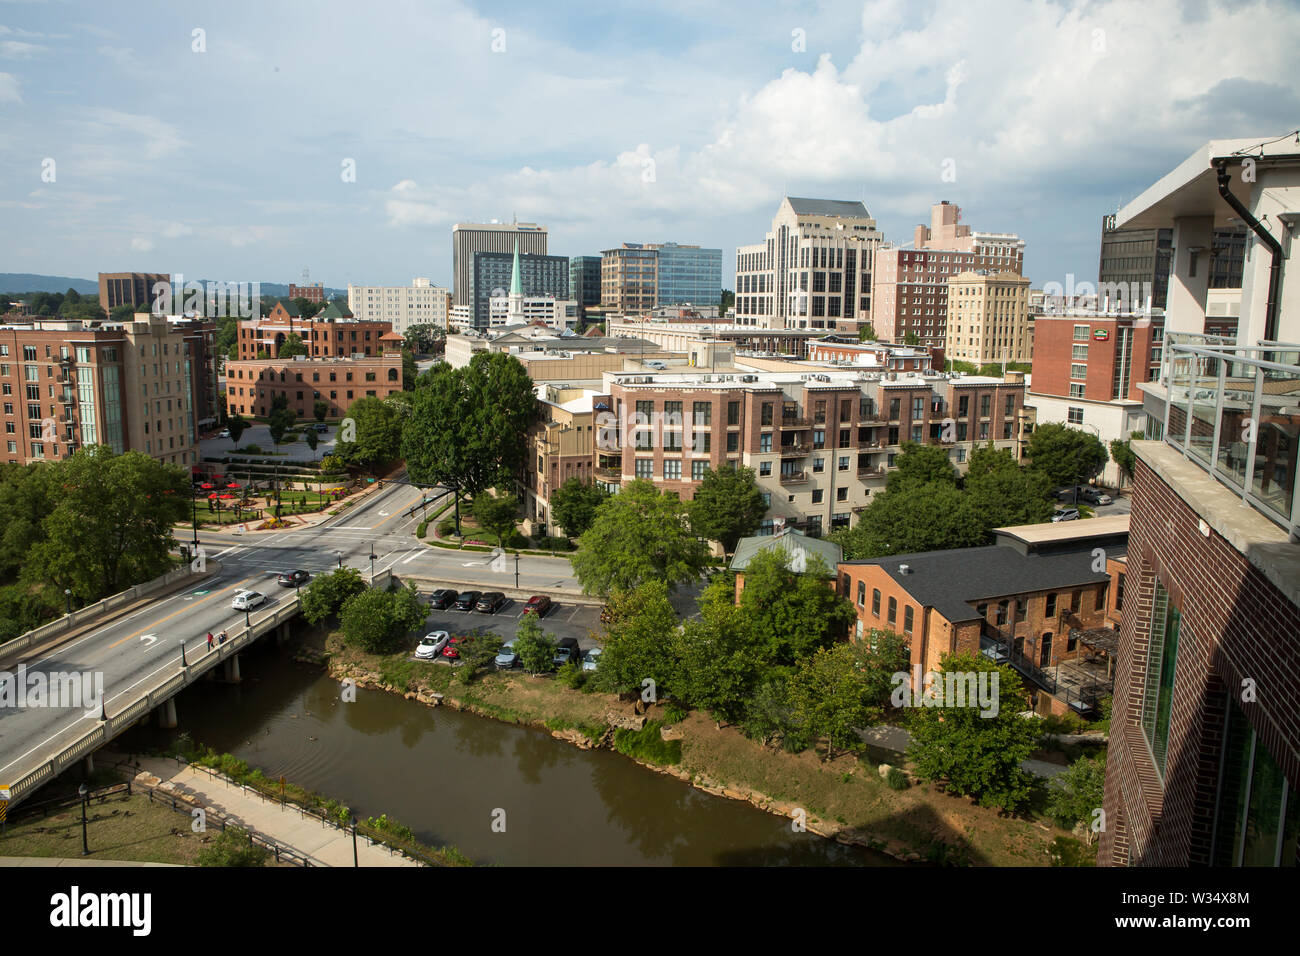 GREENVILLE, SC (USA) - July 5, 2019: A rooftop view of the Greenville skyline with the Reedy River at bottom. Stock Photo